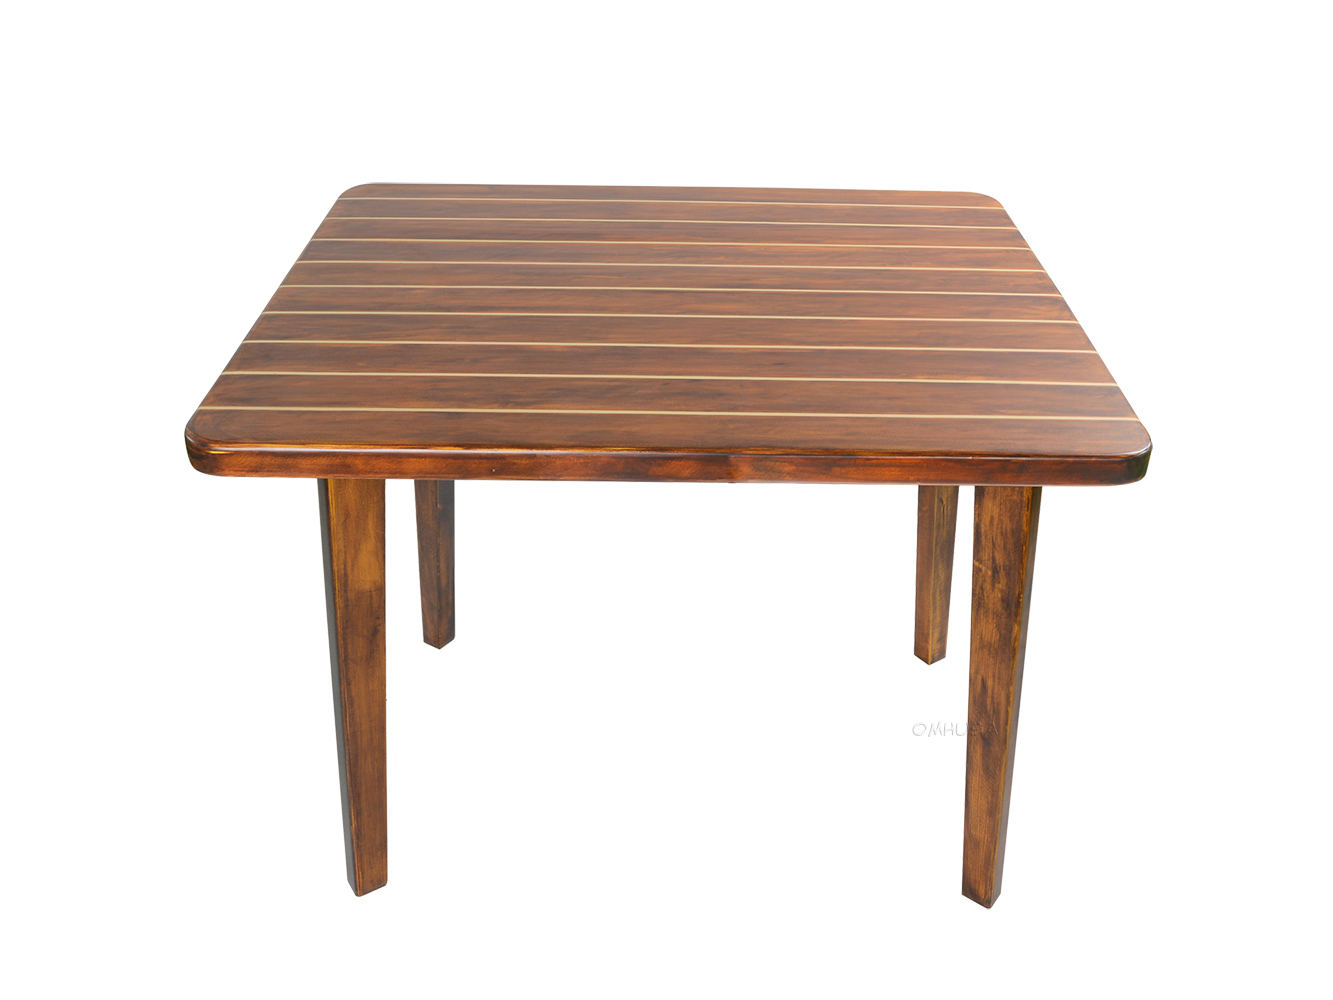 CF007 Nautical Table With Inlay Wood Stripes Small CF007L01.jpg